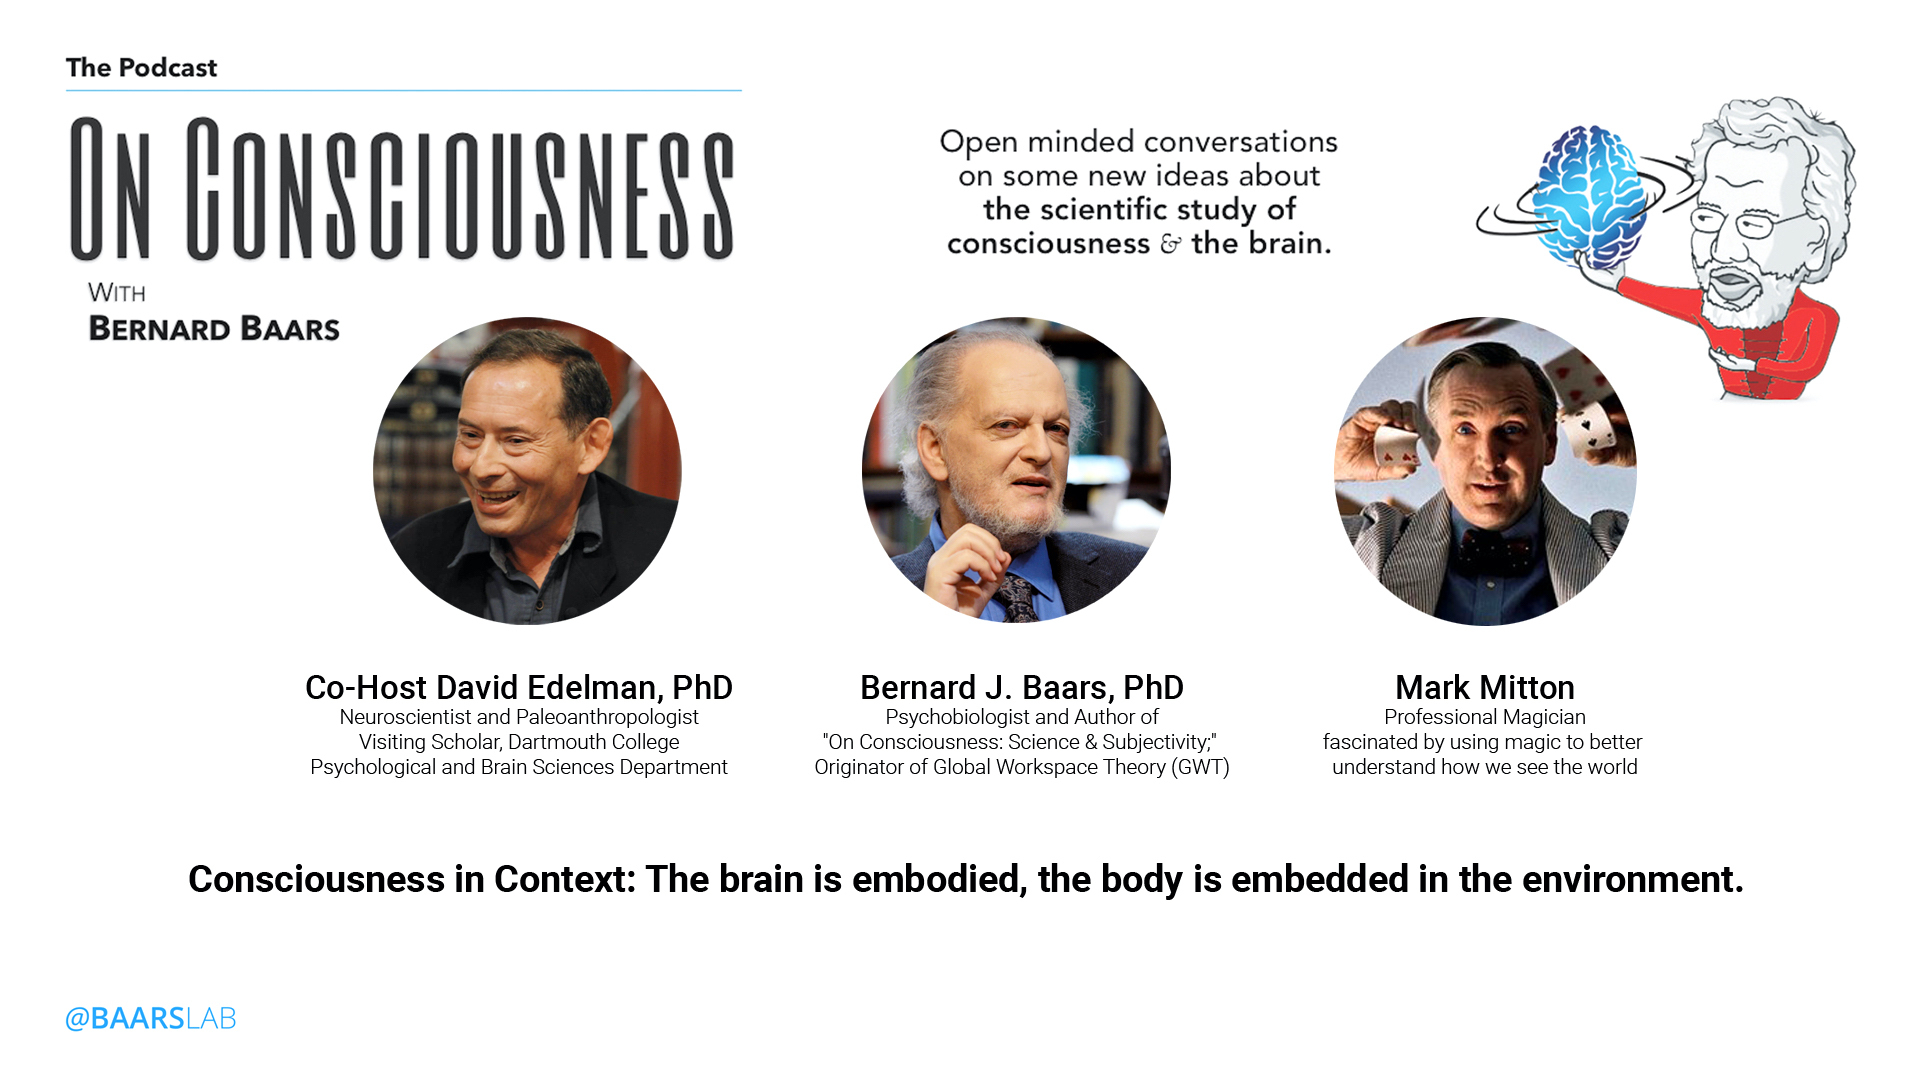 ep-12-the-brain-is-embodied-and-the-body-is-embedded-david-edelman-mark-mitton-with-bernard-baars-on-consciousness-neuroscience-psychology.jpg